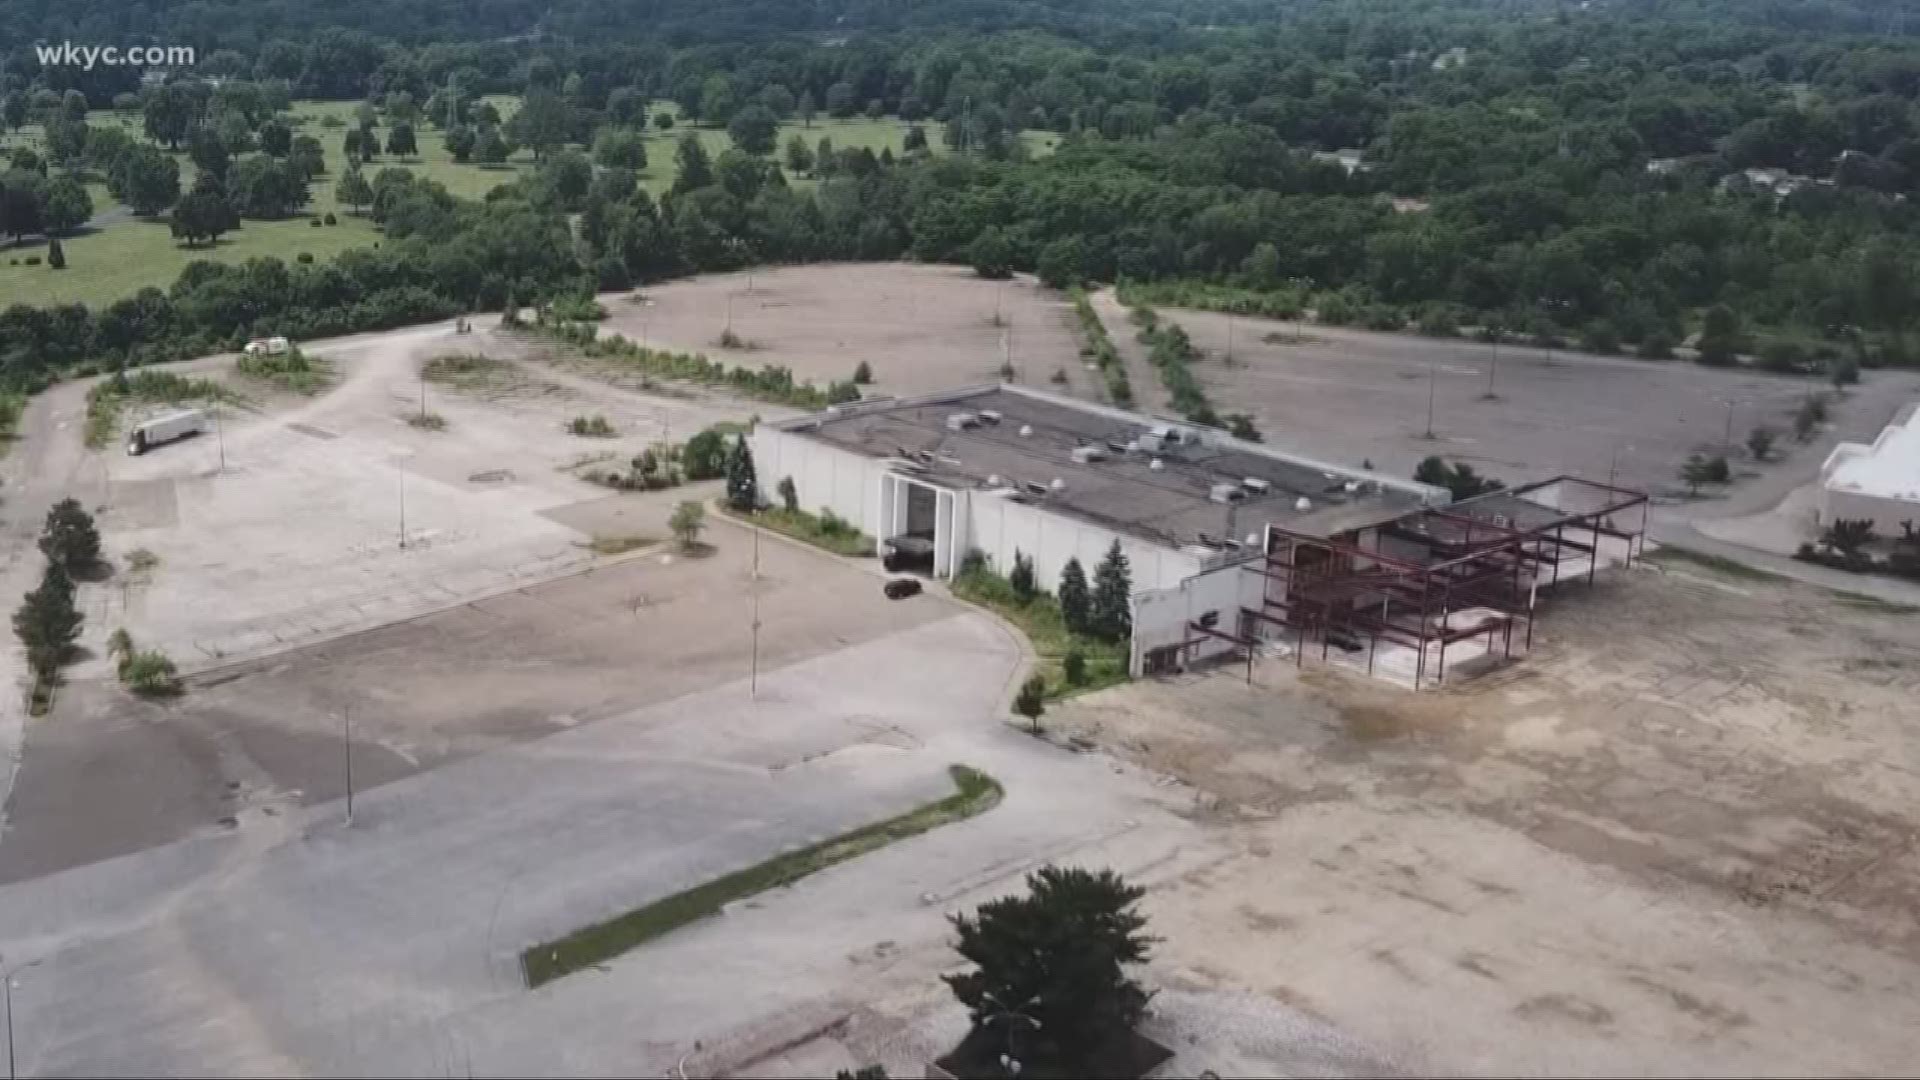 Amazon appears to be the company moving into Rolling Acres Mall site in Akron